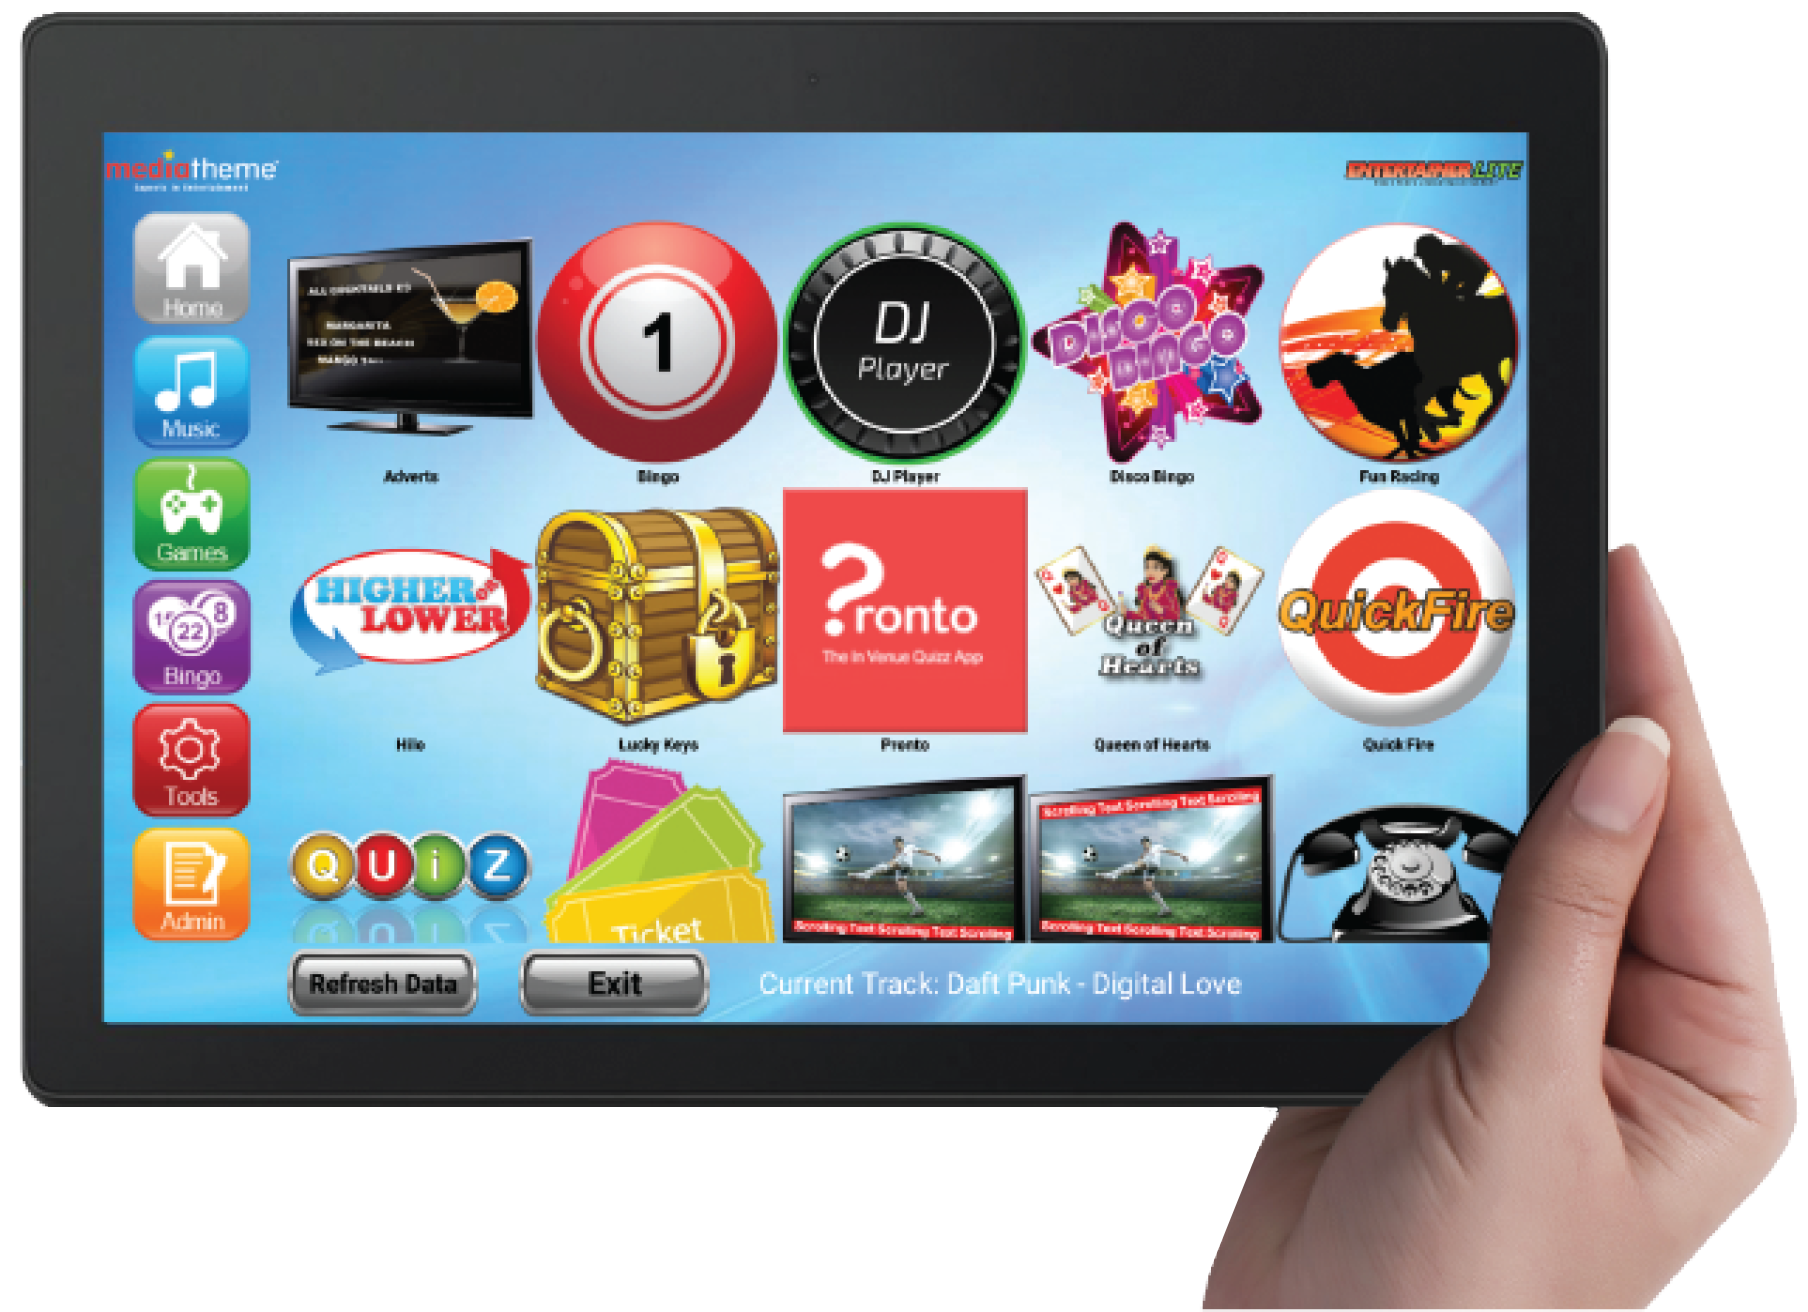 Touchscreen Entertainment System for pubs, entertainment, hospitality and holiday sectors